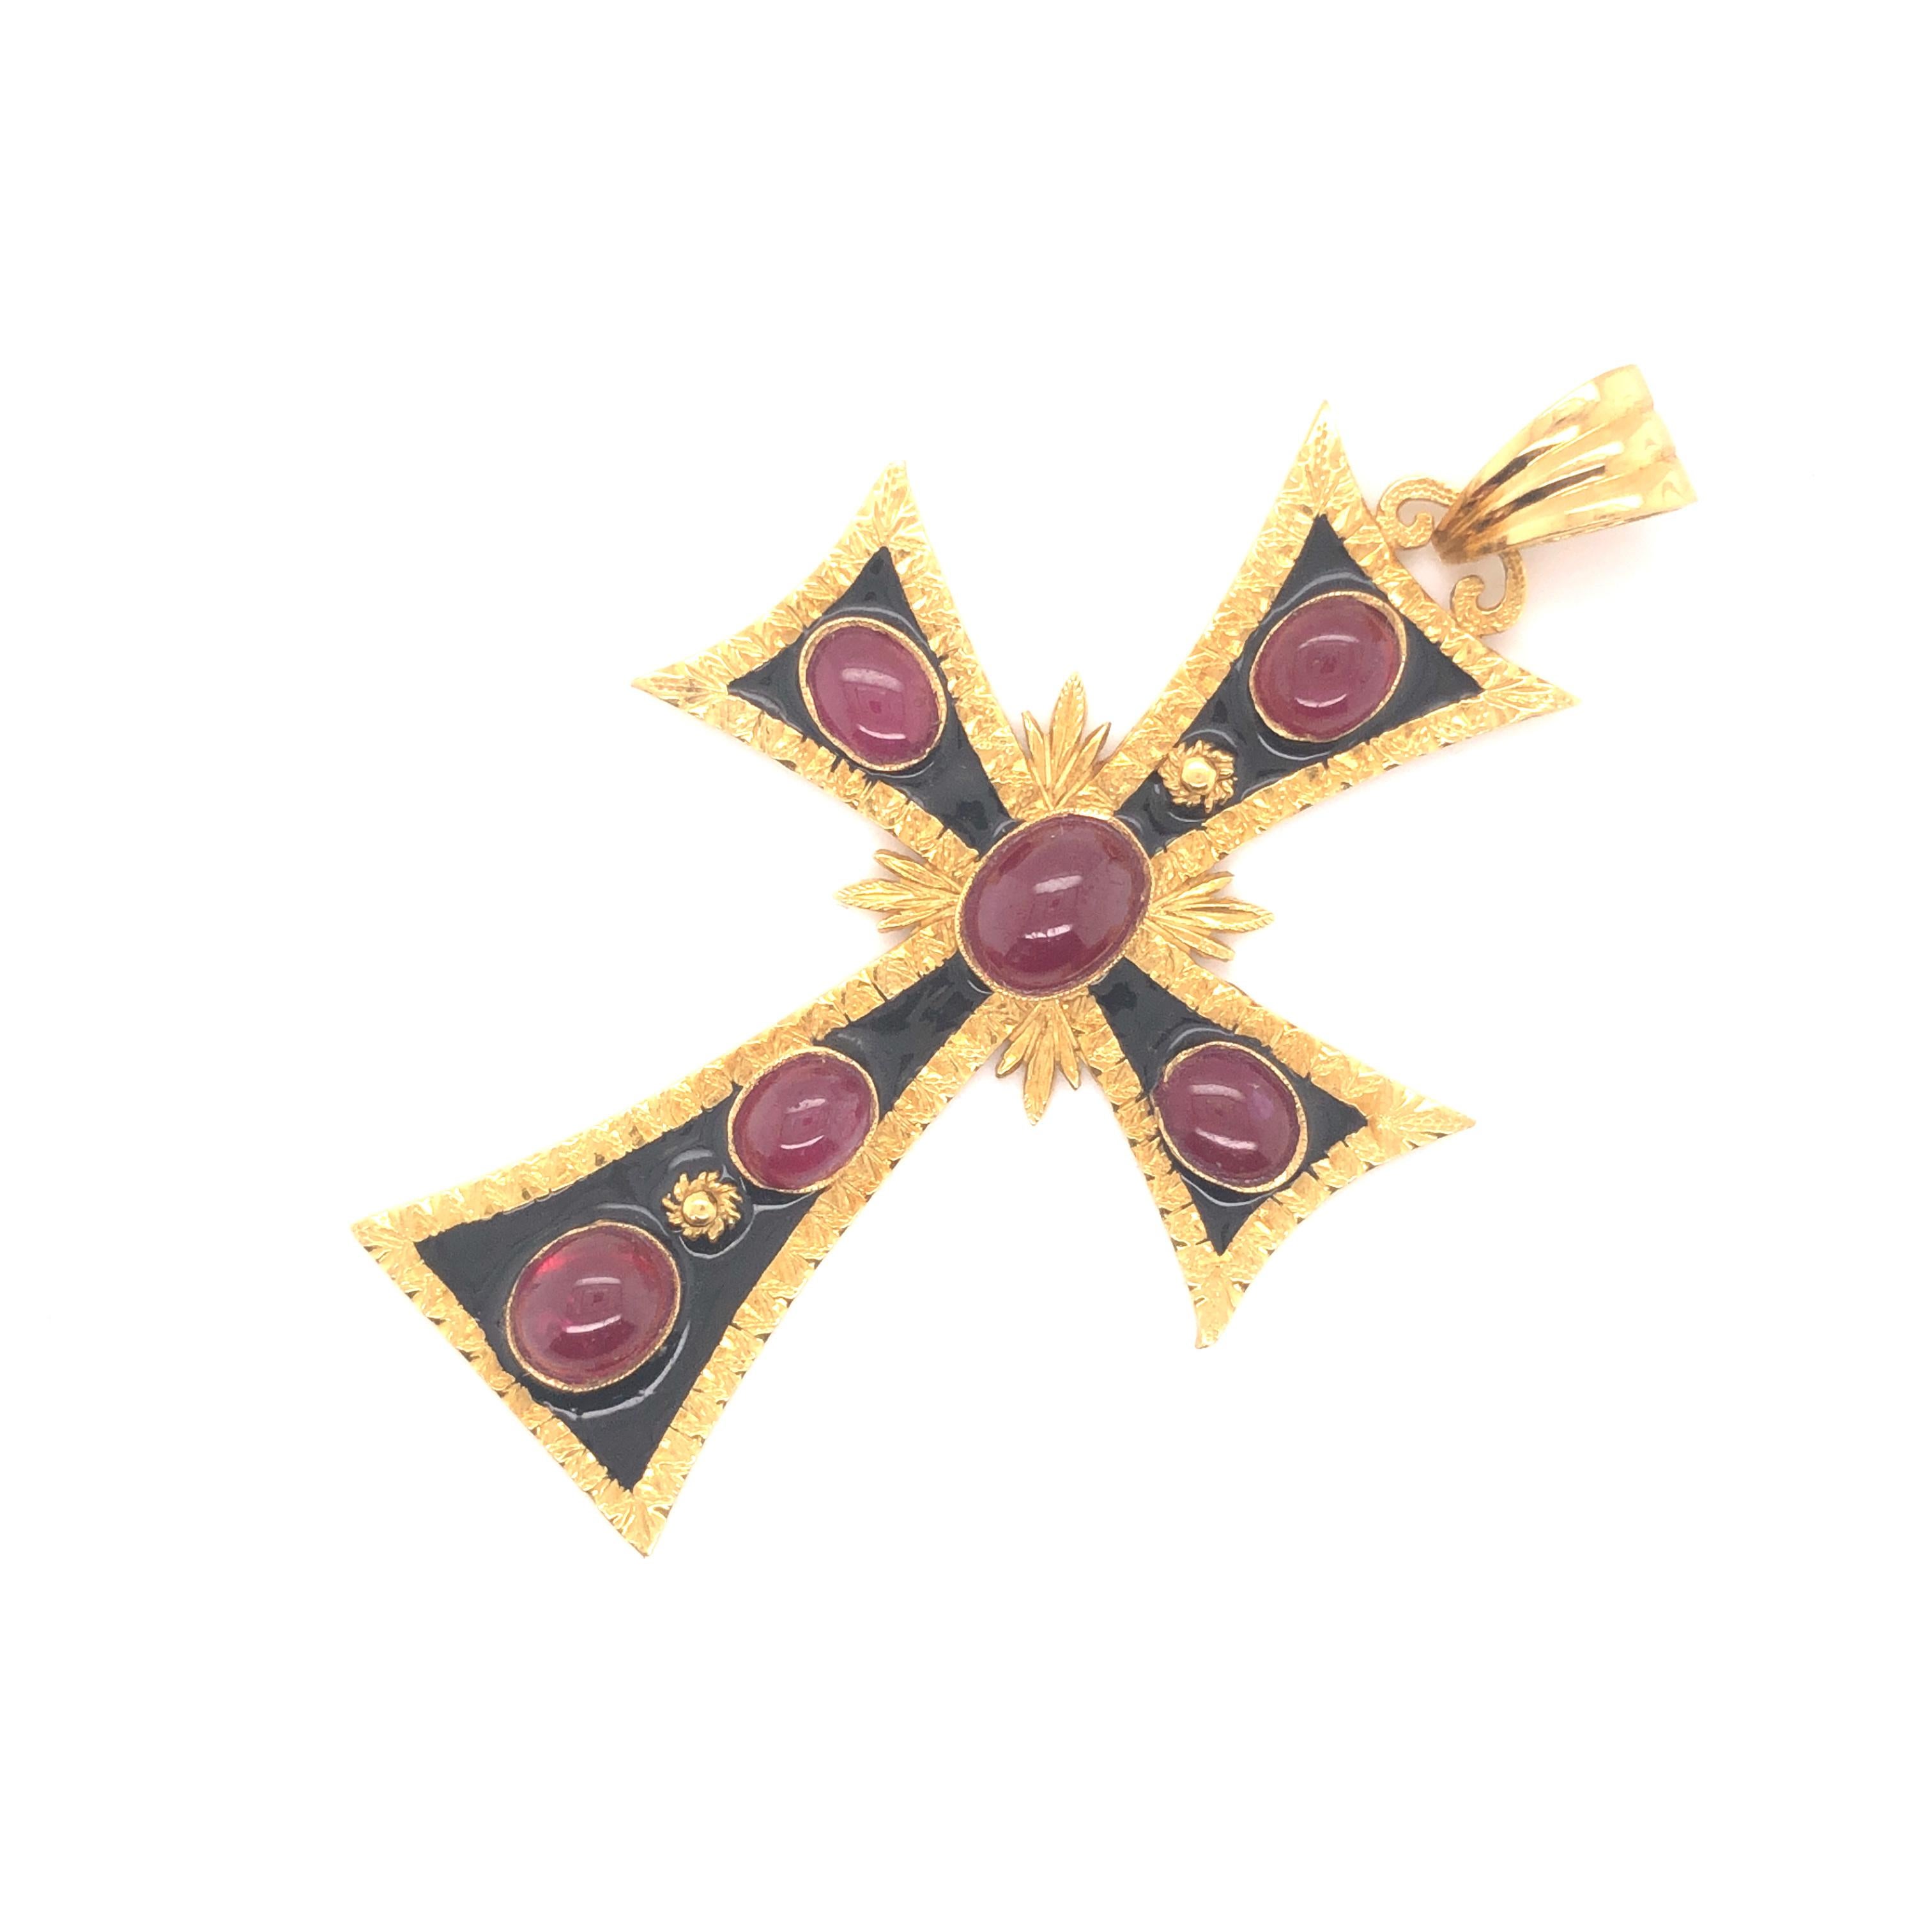 Large one of a kind cross pendant crafted in 18k yellow gold. This beautiful design shows detail throughout. The focal point of the pendant are five bezel set cabochon rubies showing a rich red color. The pendant has etching throughout the design